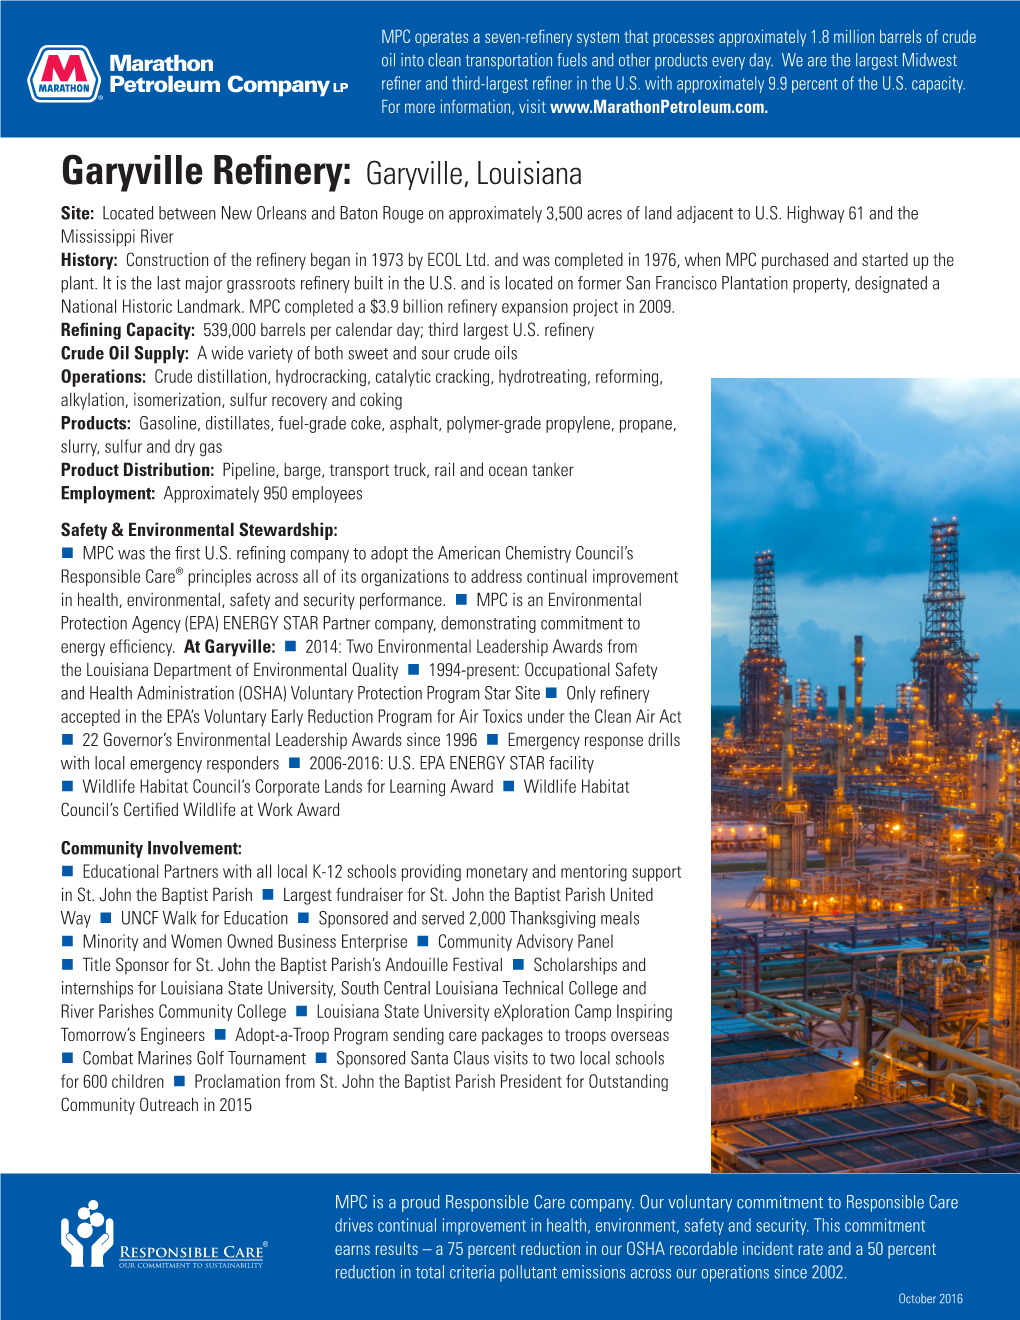 Garyville Refinery: Garyville, Louisiana Site: Located Between New Orleans and Baton Rouge on Approximately 3,500 Acres of Land Adjacent to U.S